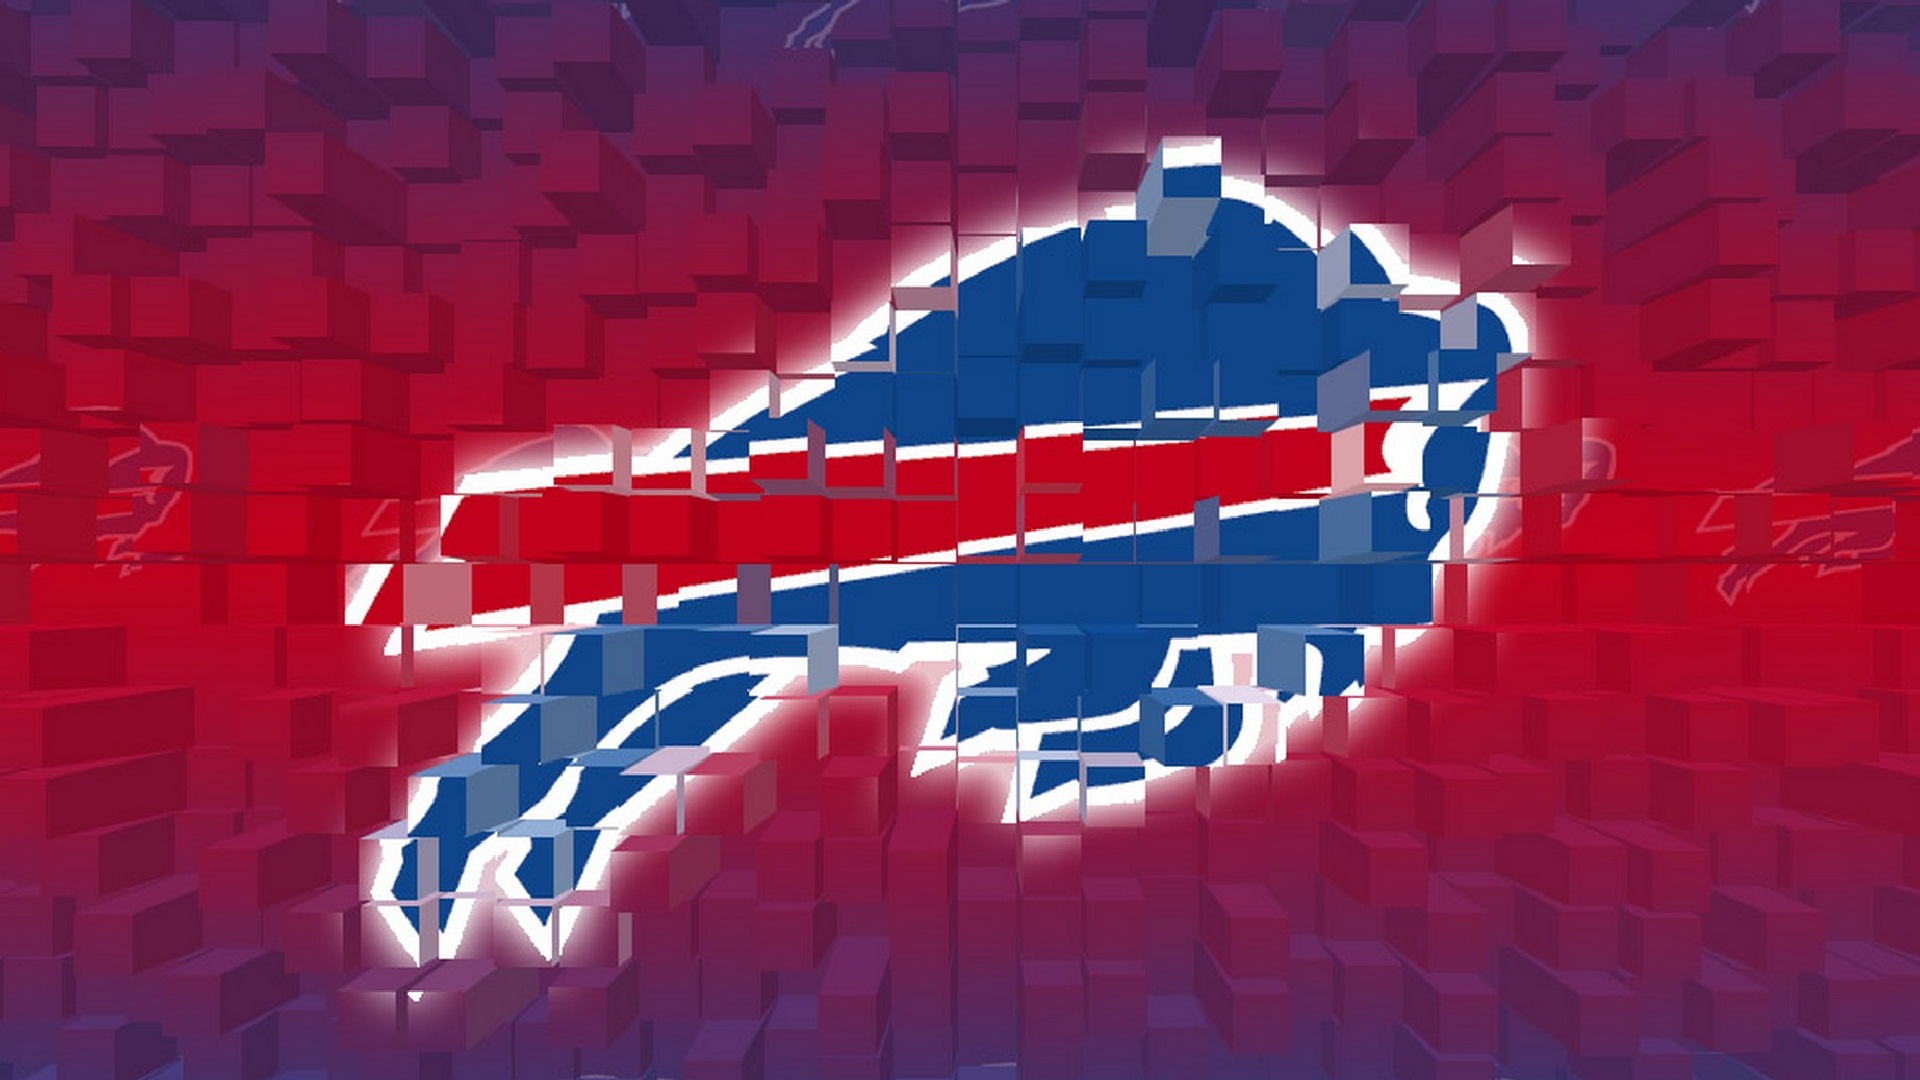 HD Buffalo Bills Backgrounds With Resolution 1920X1080